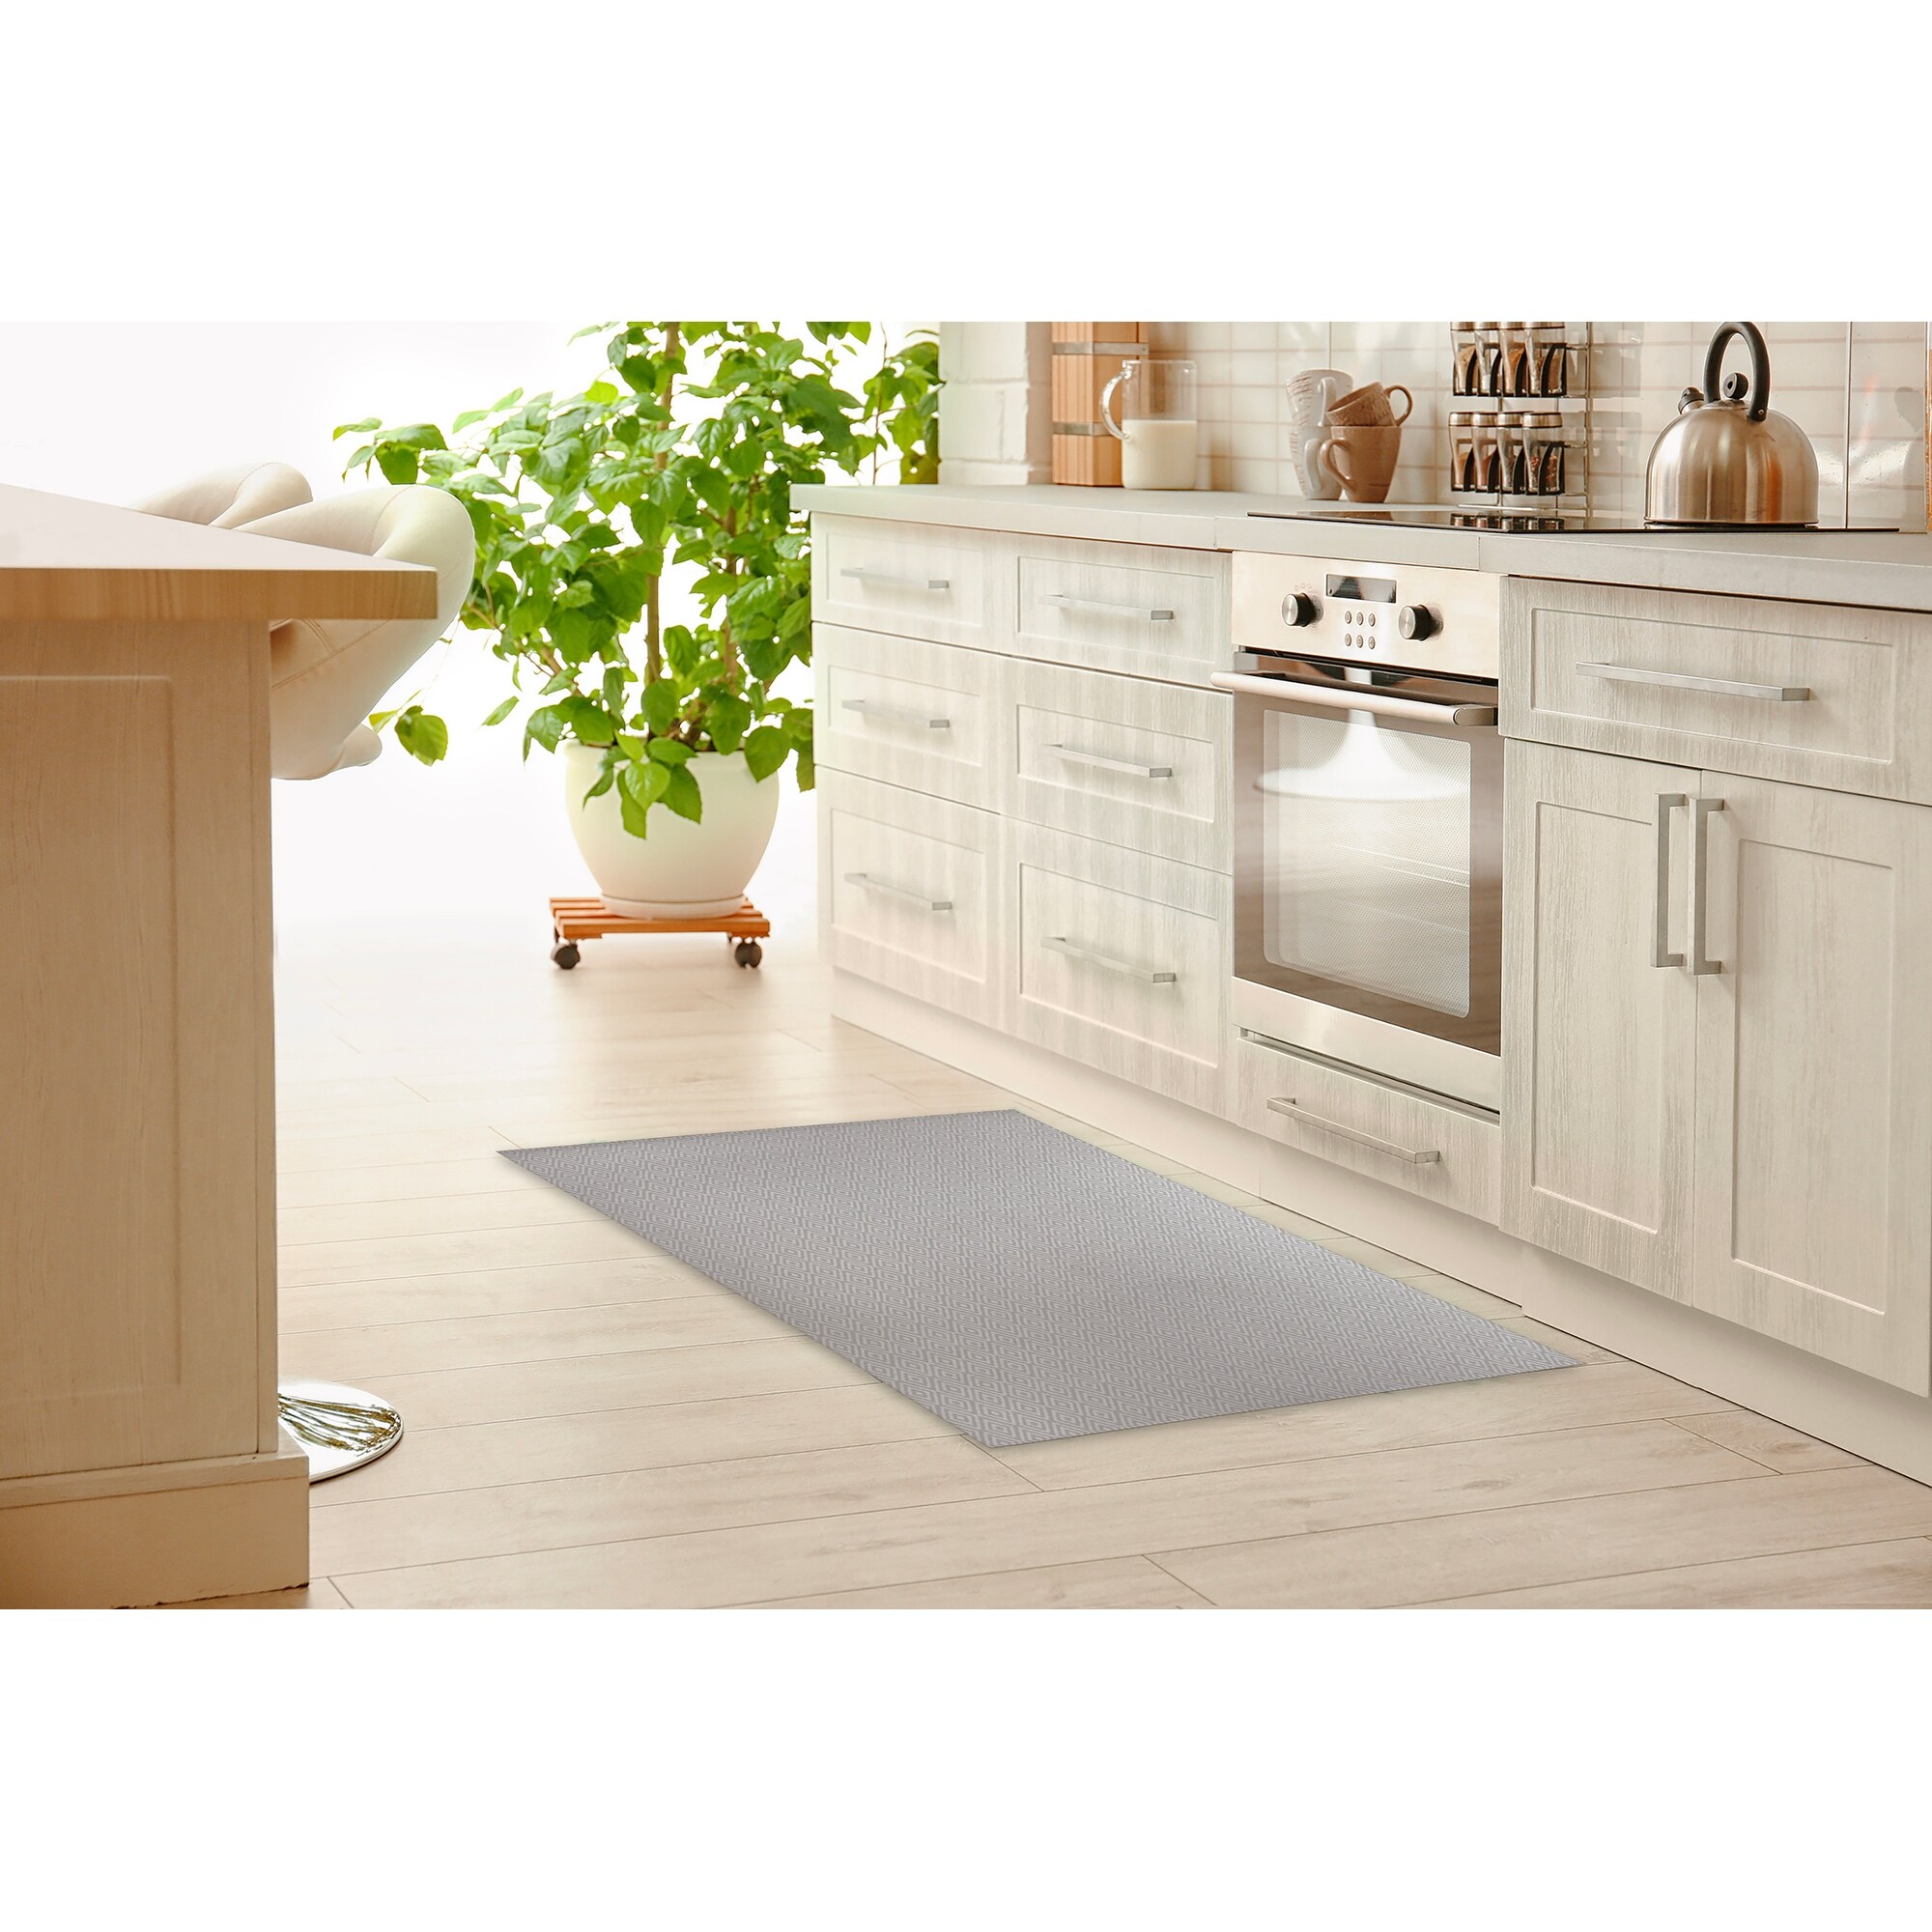 https://ak1.ostkcdn.com/images/products/is/images/direct/64270e0d5f4f05520eddc19ebeda8413c1c6a4a1/MARCI-LIGHT-GREY-Kitchen-Mat-By-Kavka-Designs.jpg